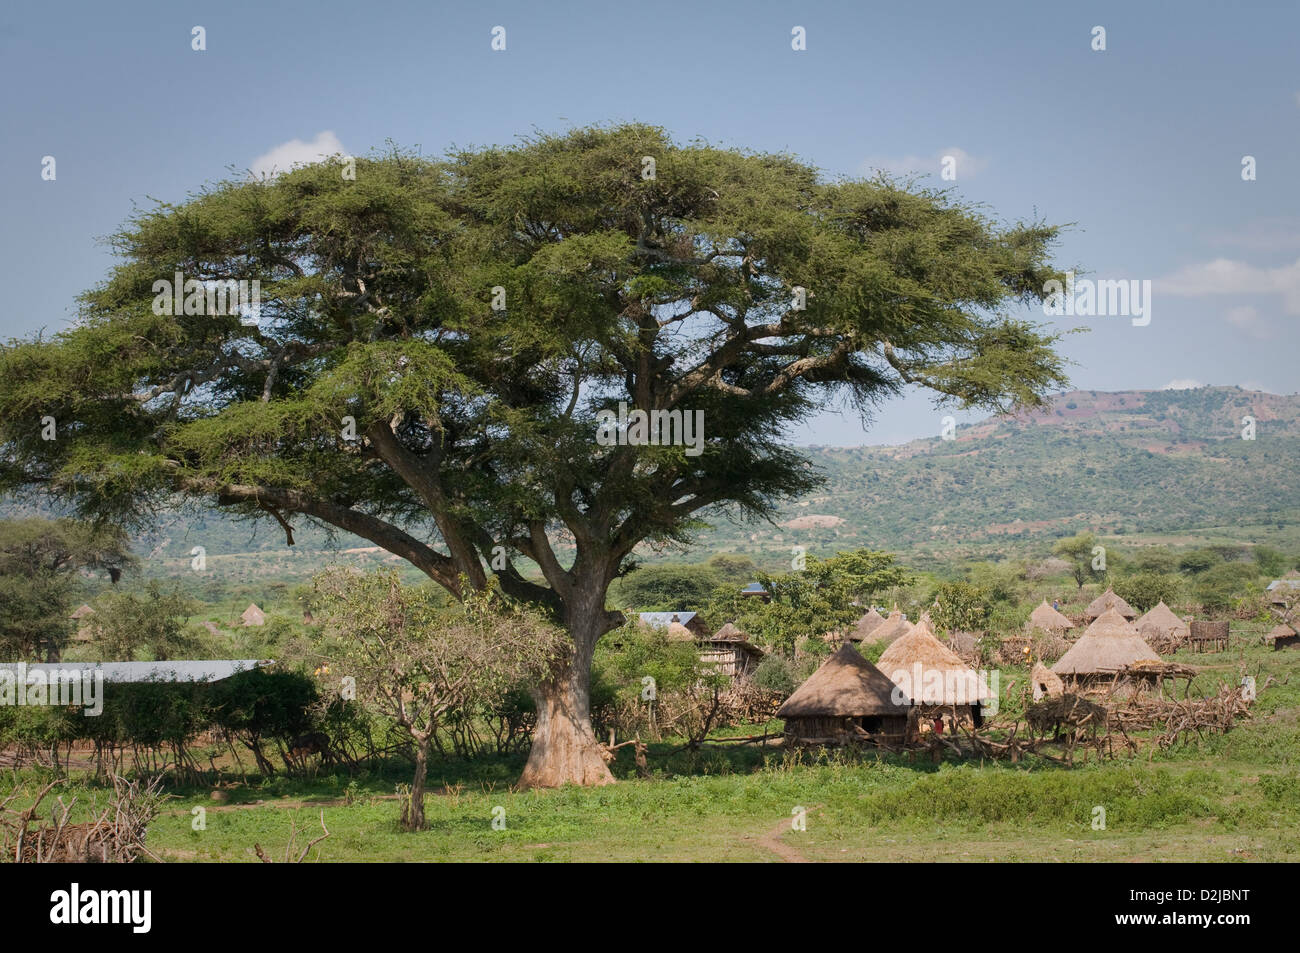 Homes and storage areas off the highway in southern Ethiopia Stock Photo